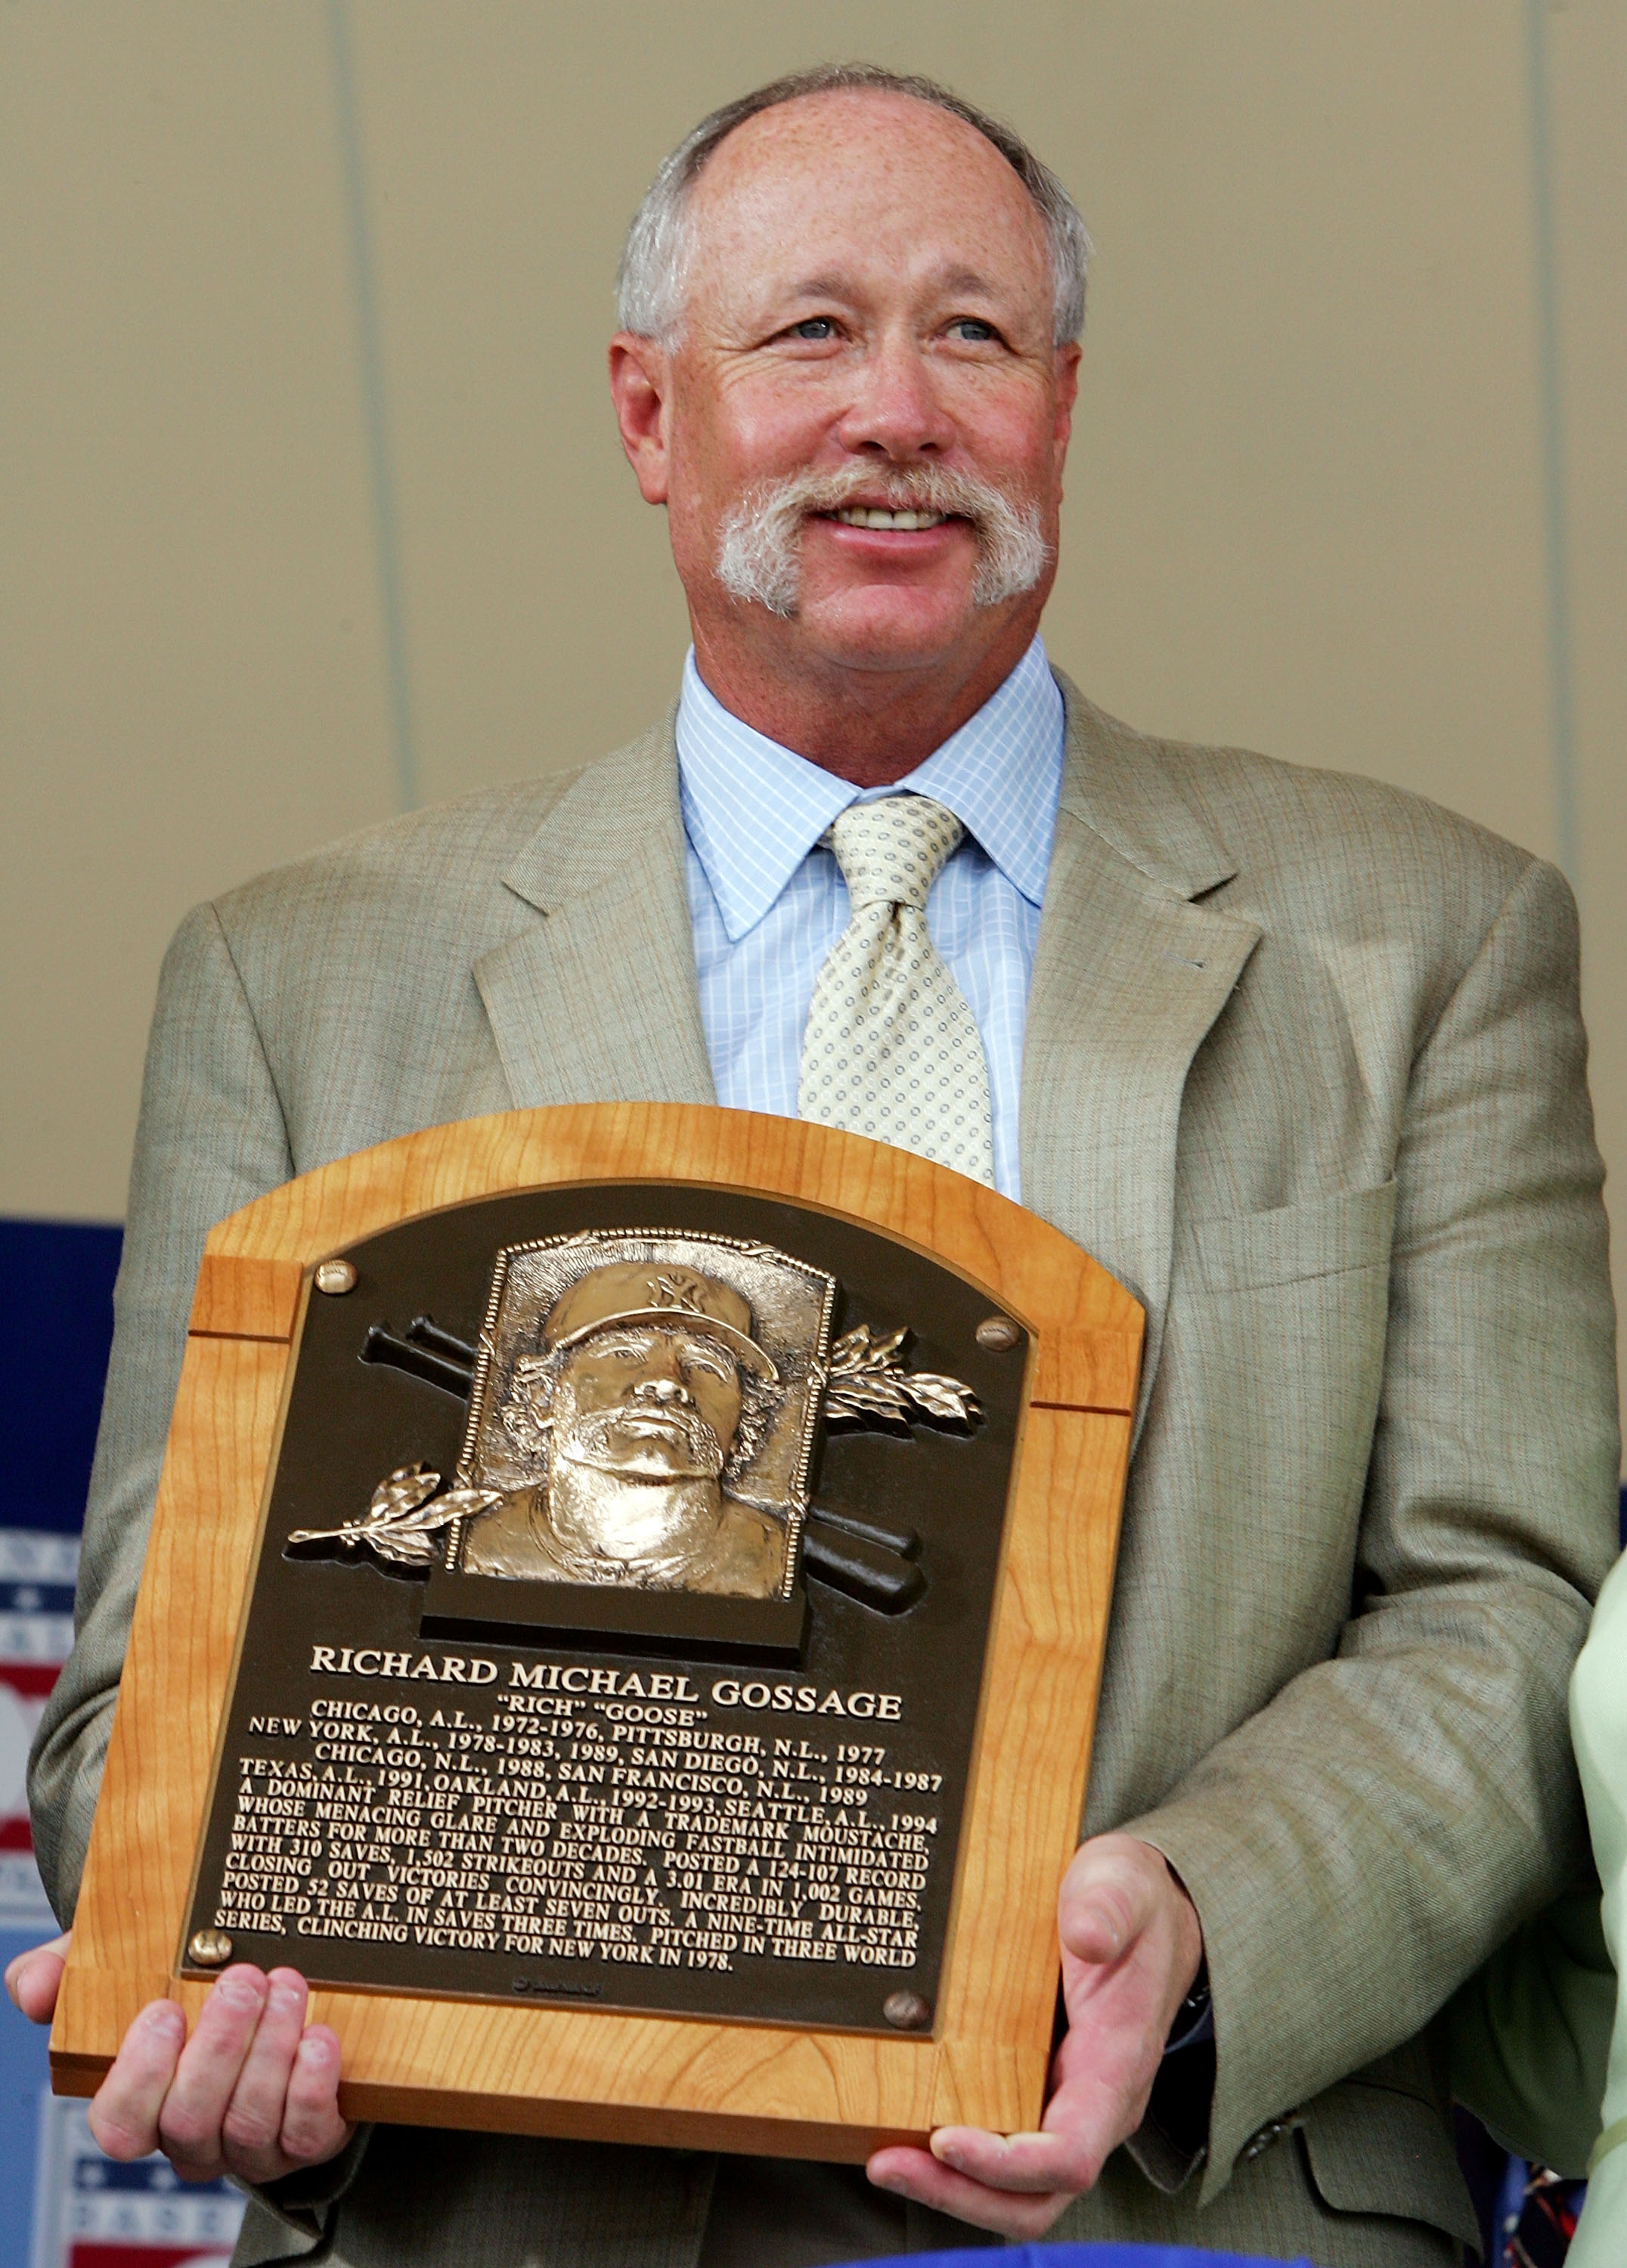 COOPERSTOWN, NY - JULY 27:  Hall of Fame inductee Rich 'Goose' Gossage holds his plaque at Clark Sports Center during the Baseball Hall of Fame induction ceremony on July 27, 2008 in Cooperstown, New York.  (Photo by Jim McIsaac/Getty Images)